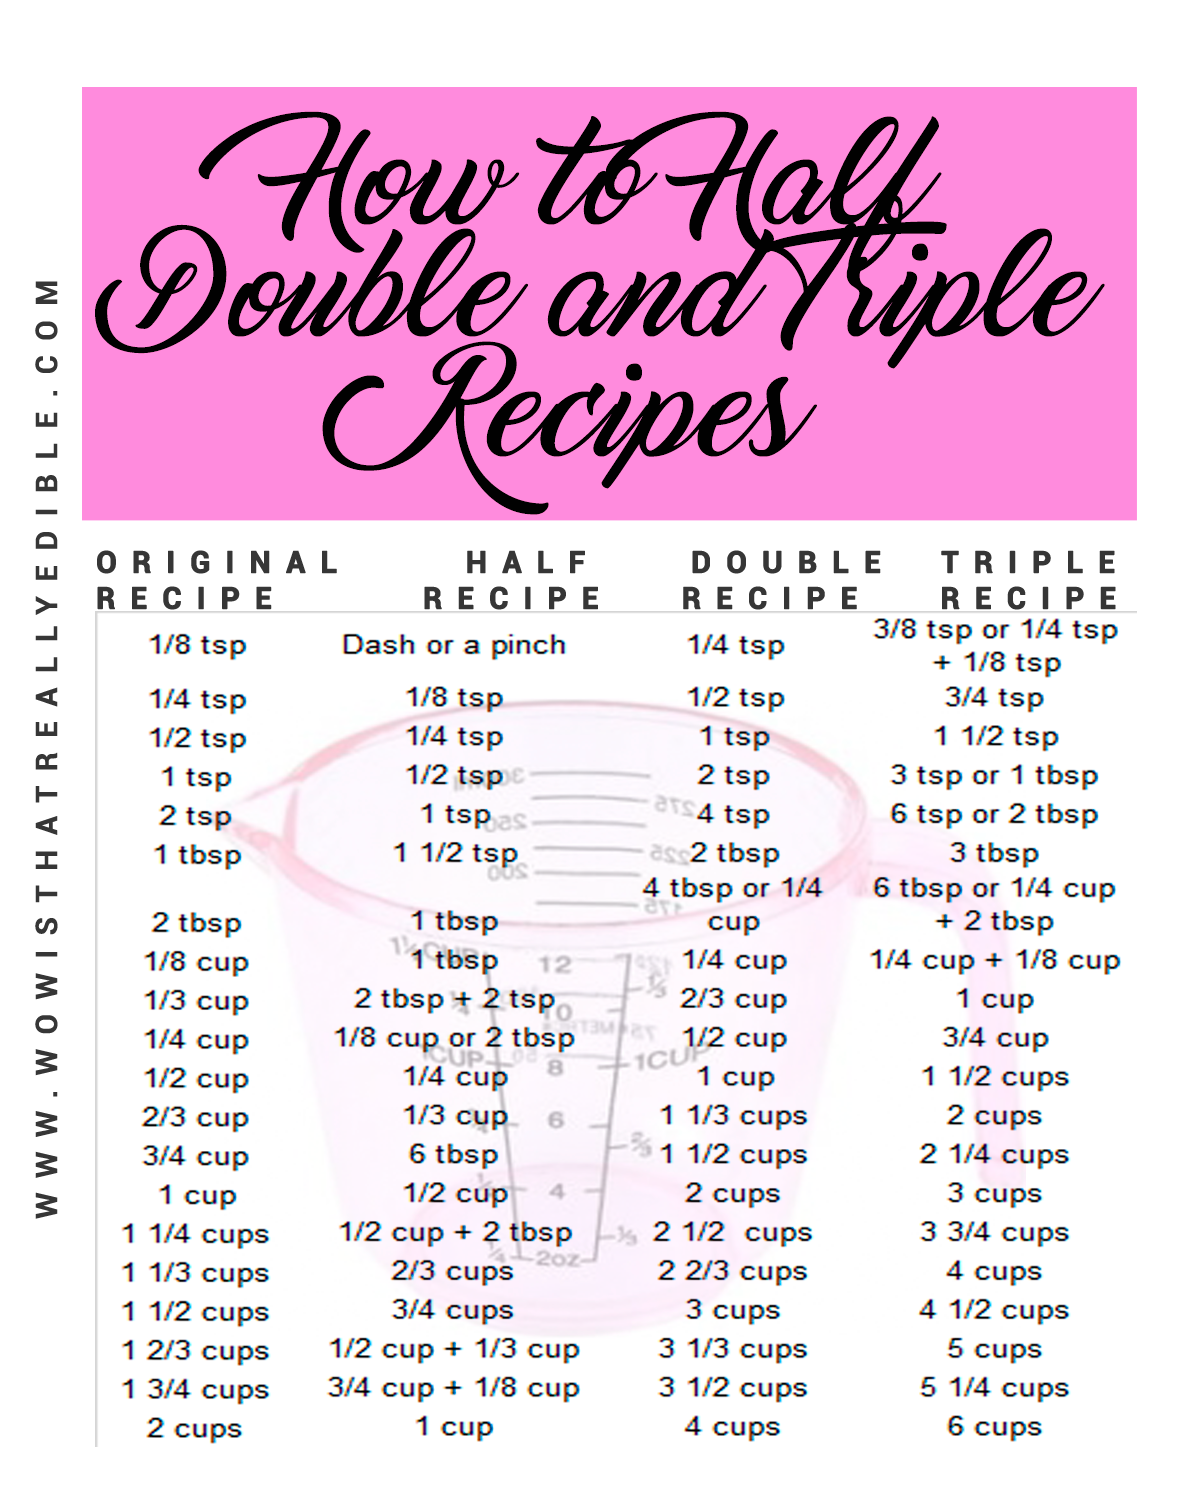 How to Half, Double and Triple Recipes - Wow! Is that really edible? Custom  Cakes+ Cake Decorating Tutorials